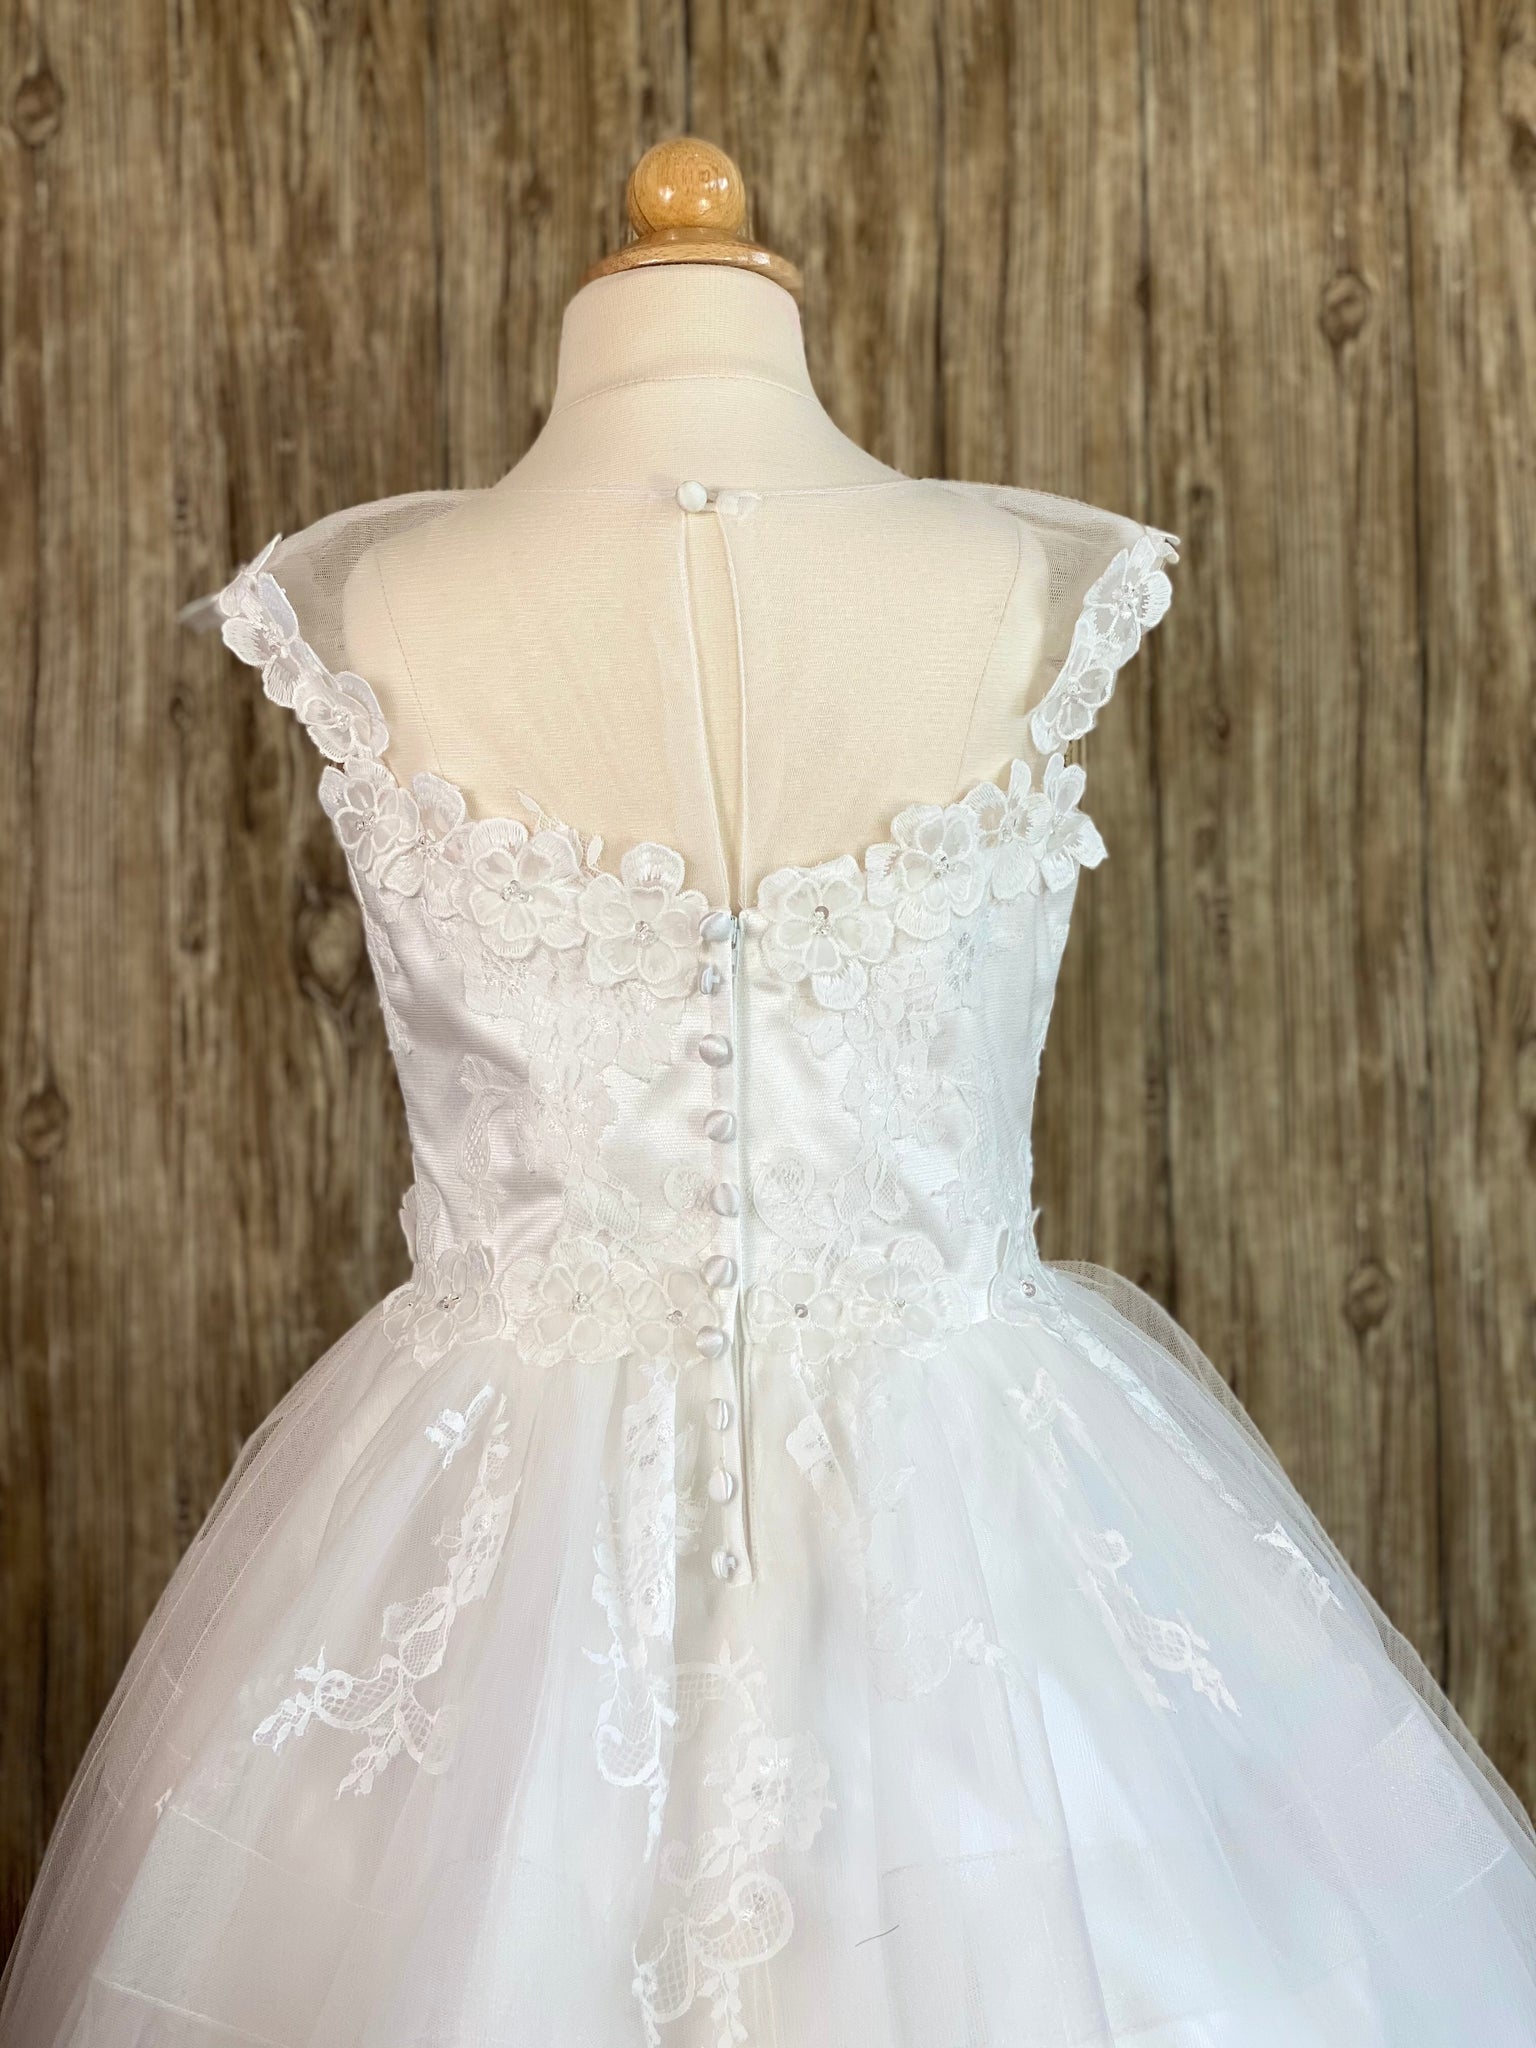 White, size 10 Lace illusion bodice with floral trim Layered tulle skirt with embroidered lace flowers Zipper closure with buttons over top